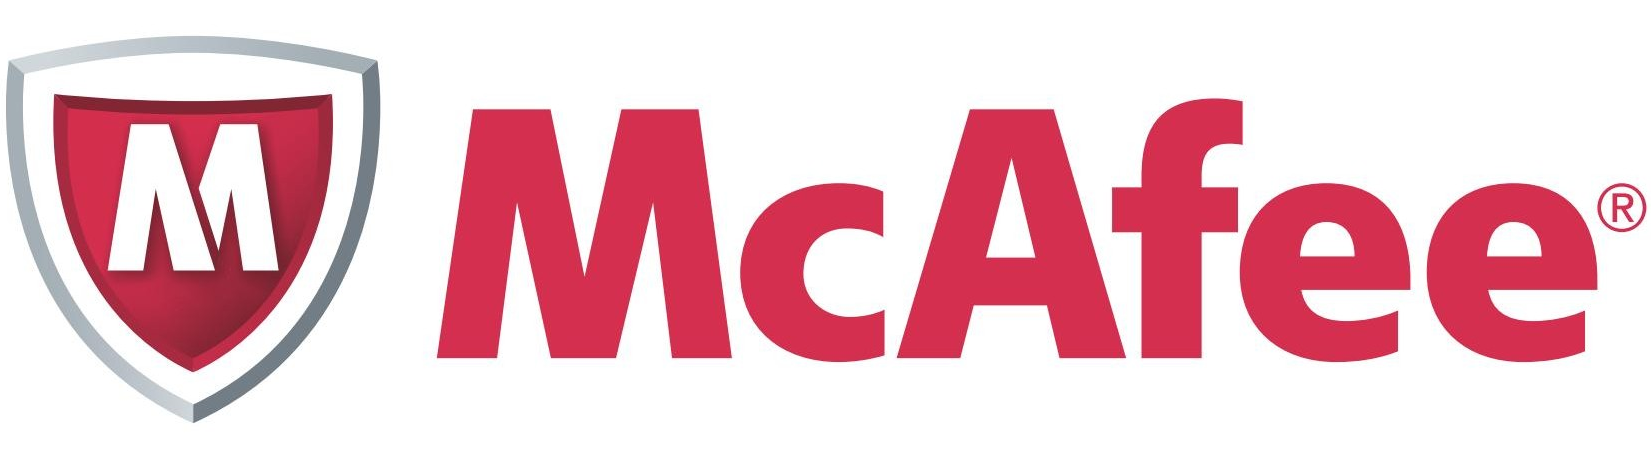 McAfee by Intel Total Protection for Compliance - Desktops With 1 year Gold Software Support - Perpetual License - 1 Live Host